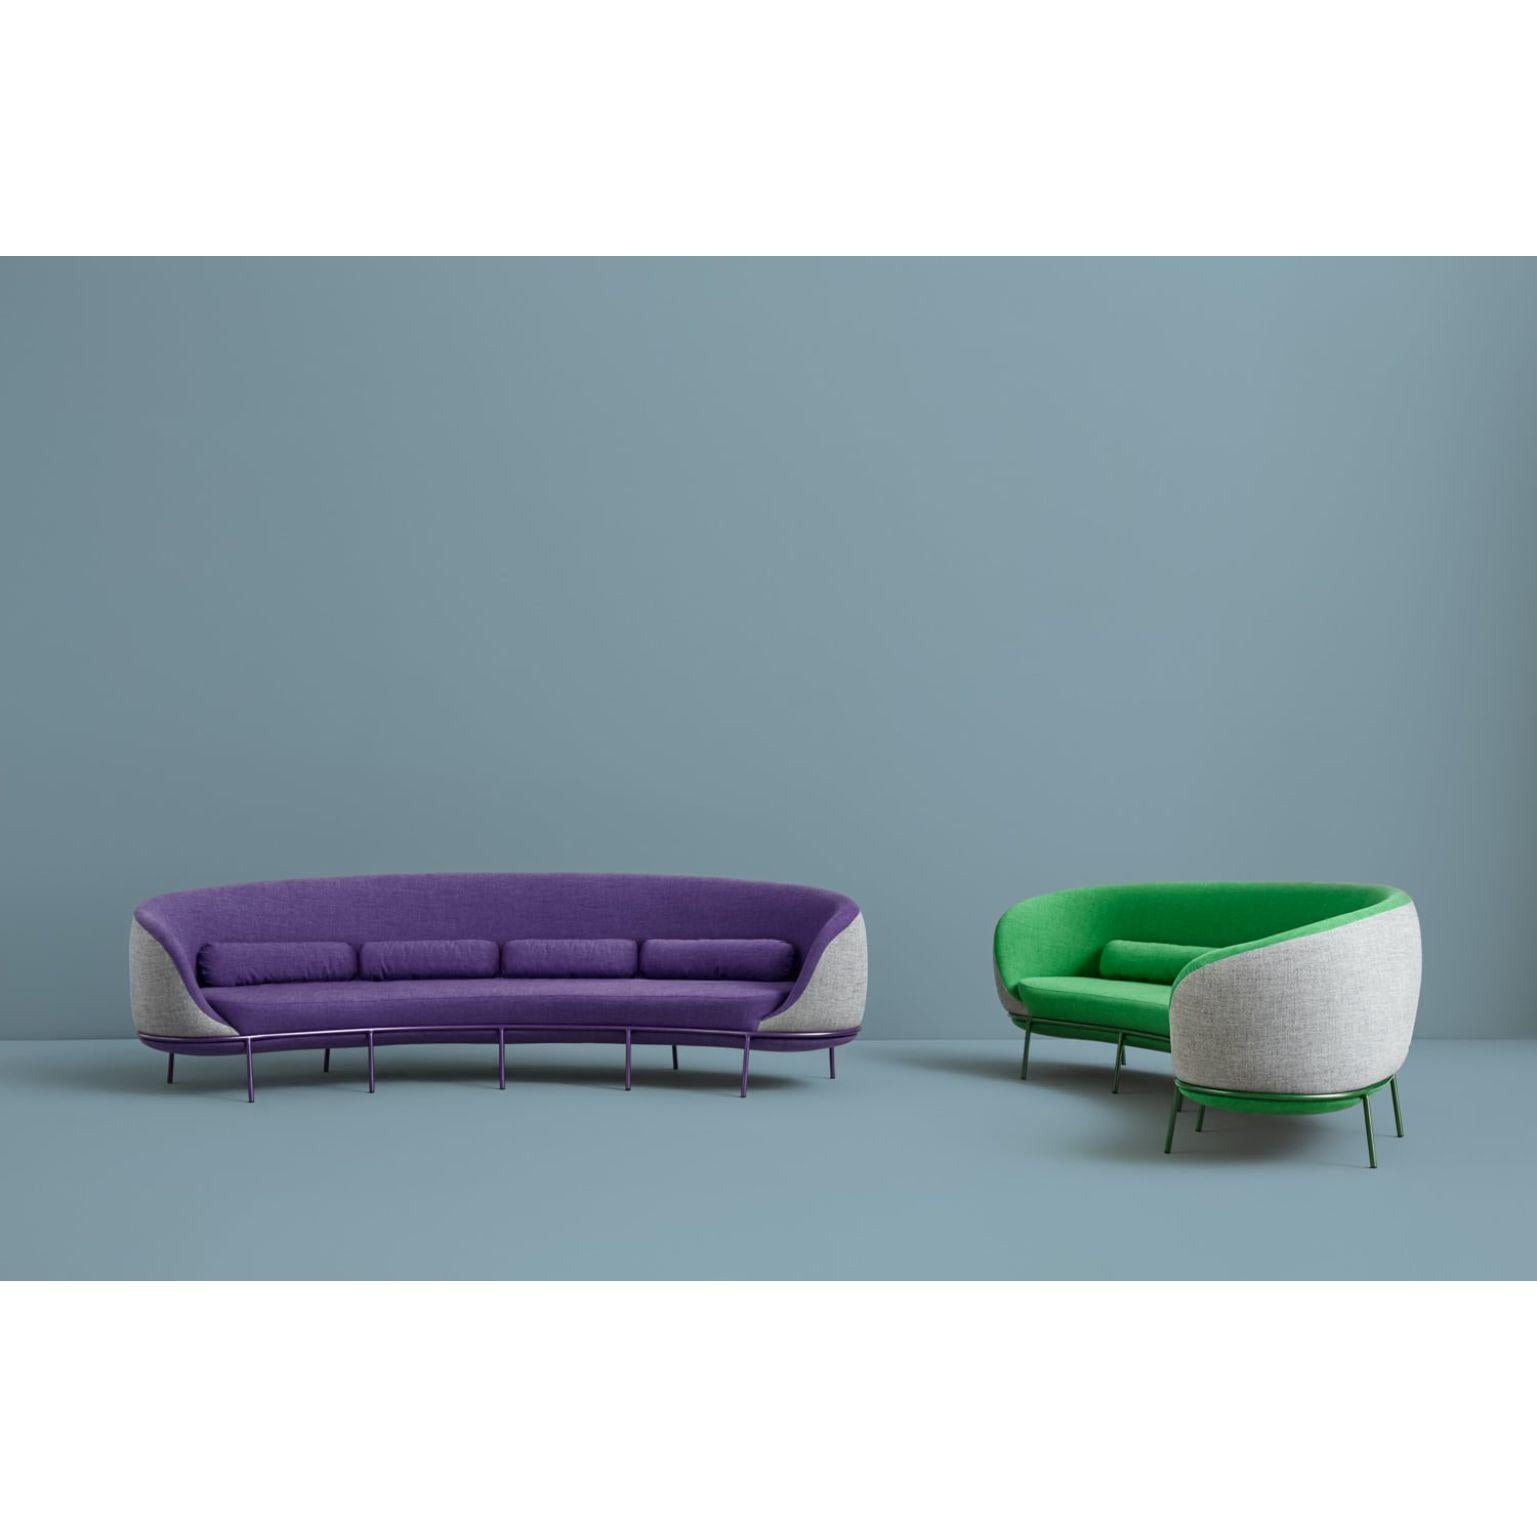 Set of purple and green nest sofa by Pepe Albargues
Dimensions: W 340, D 110, H 80, Seat 41
Materials: Iron structure and MDF board
Foam CMHR (high resilience and flame retardant) for all our cushion filling systems
Painted or chromed